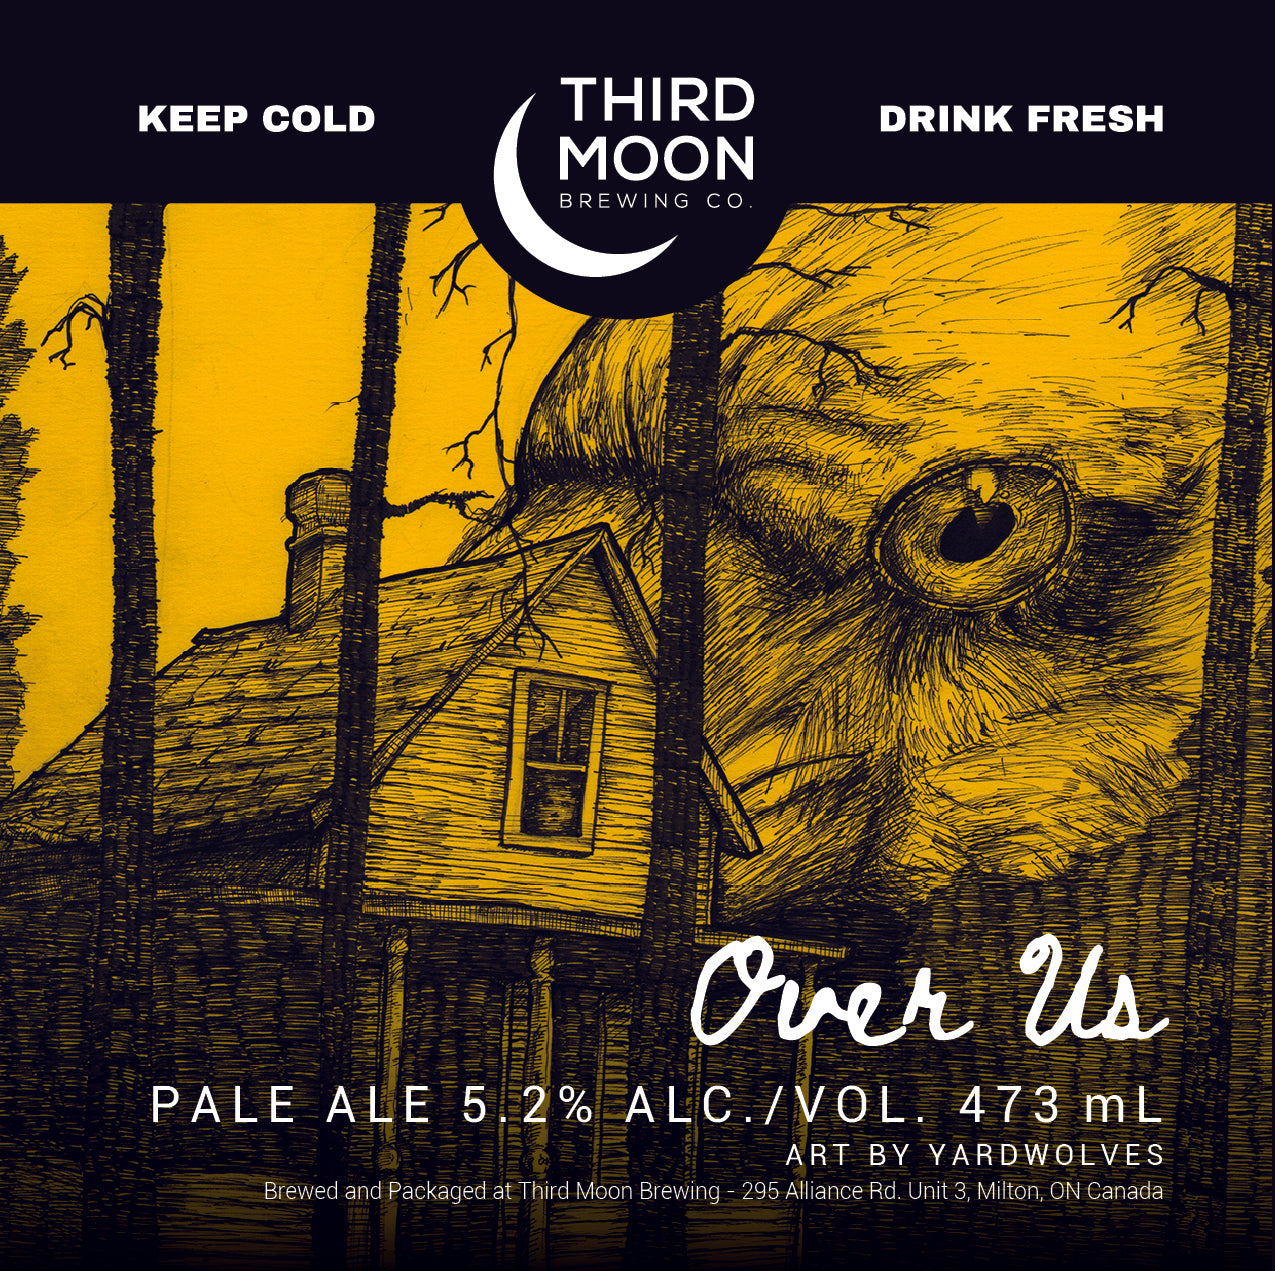 Pale Ale - 4-pk of "Over Us" tall cans